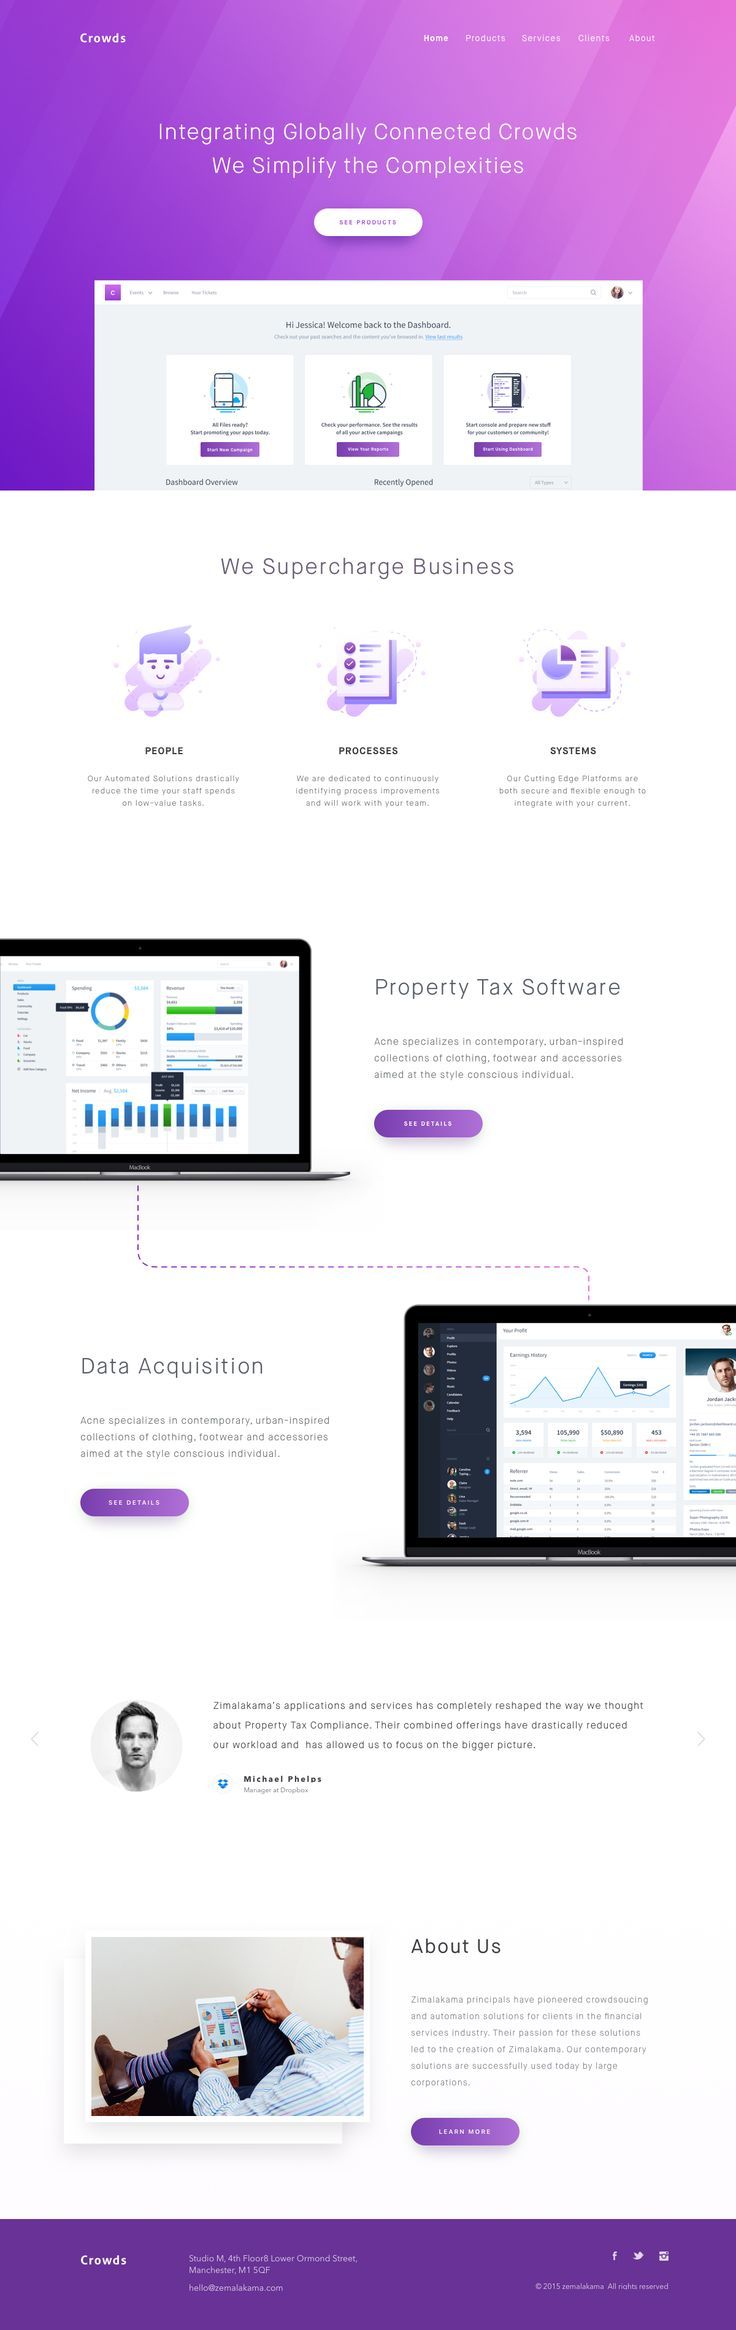 Property tax and data acquisition landing page